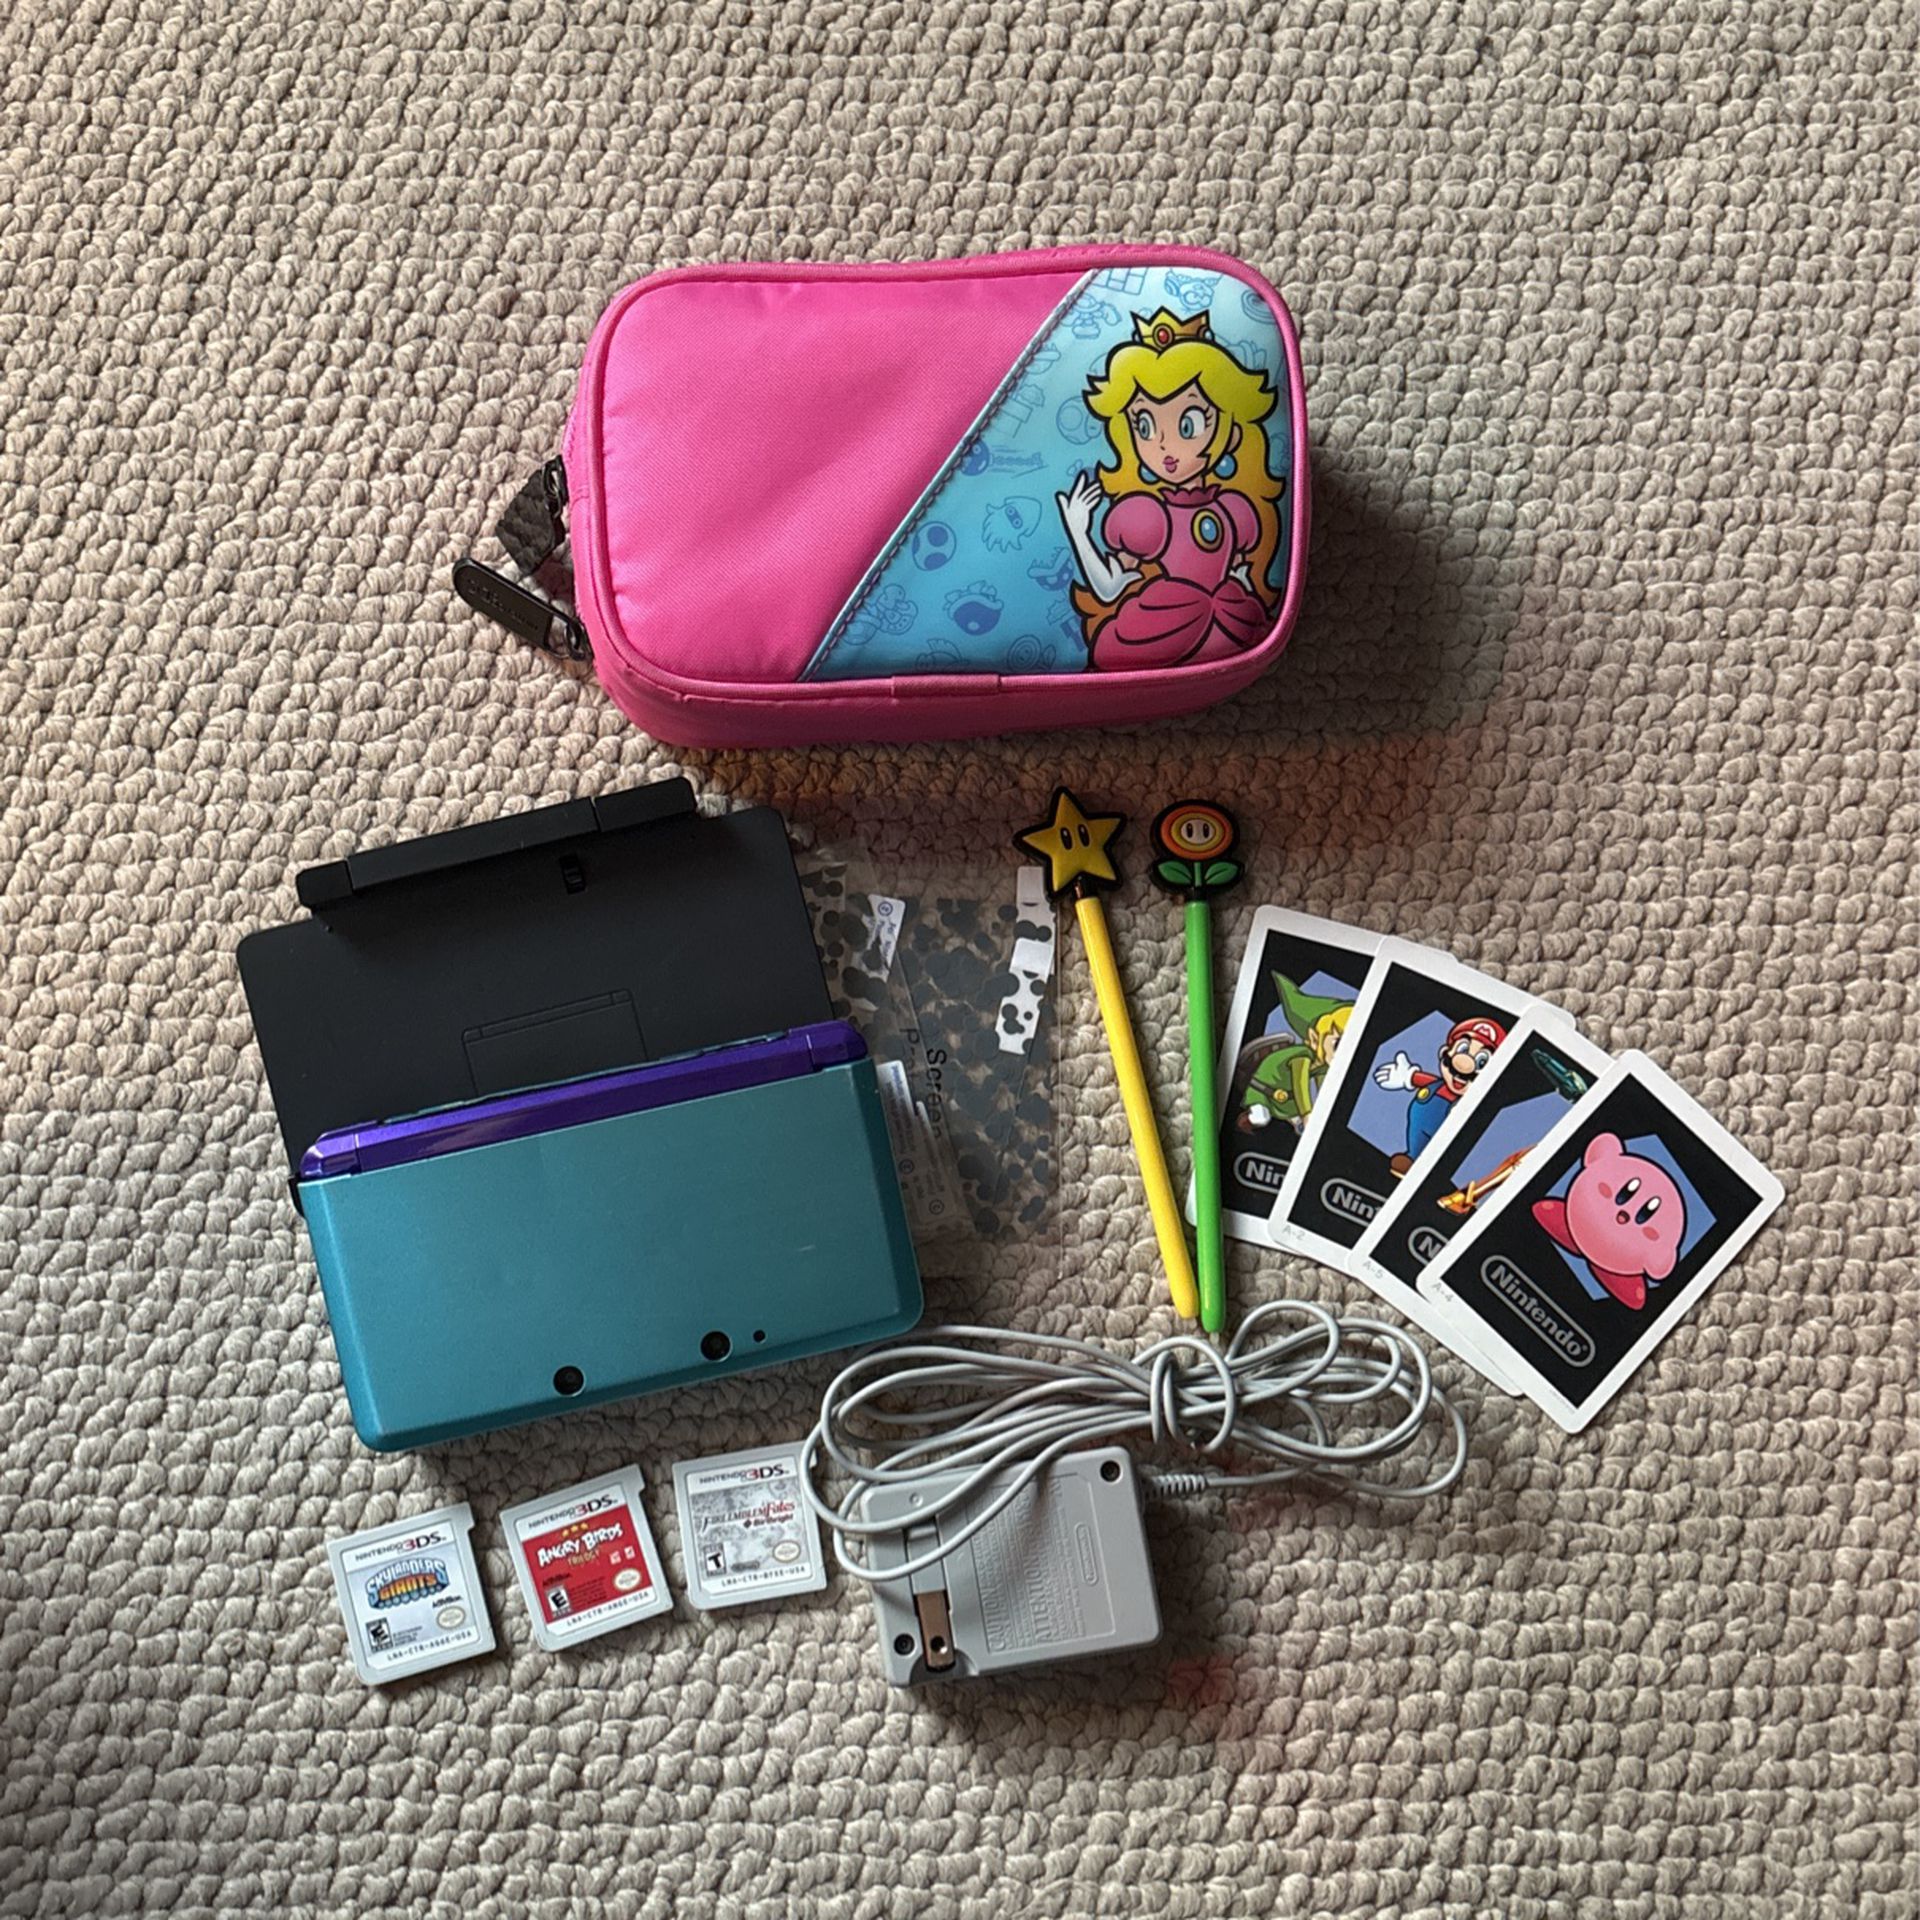 Nintendo 3DS with charger and games